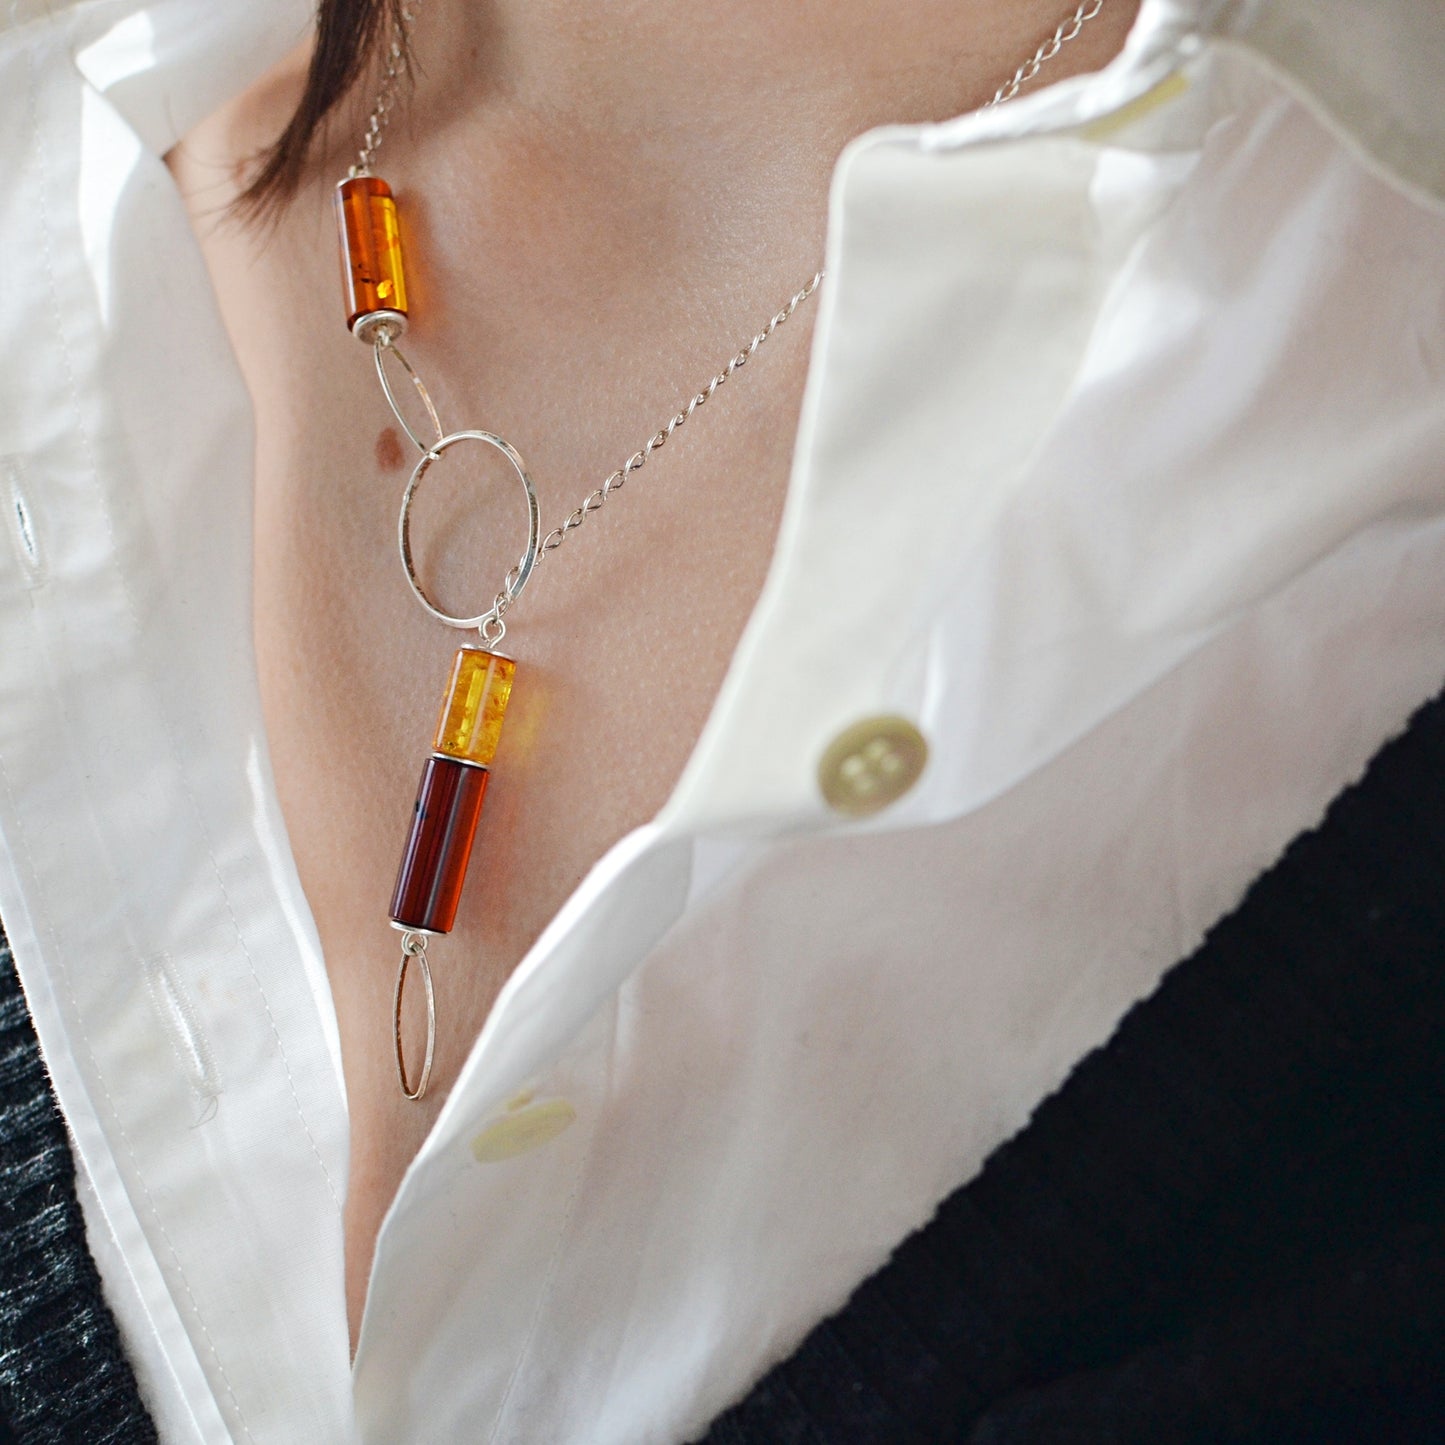 Silver Y-shape lariat chain necklace with amber, drop amber necklace with silver